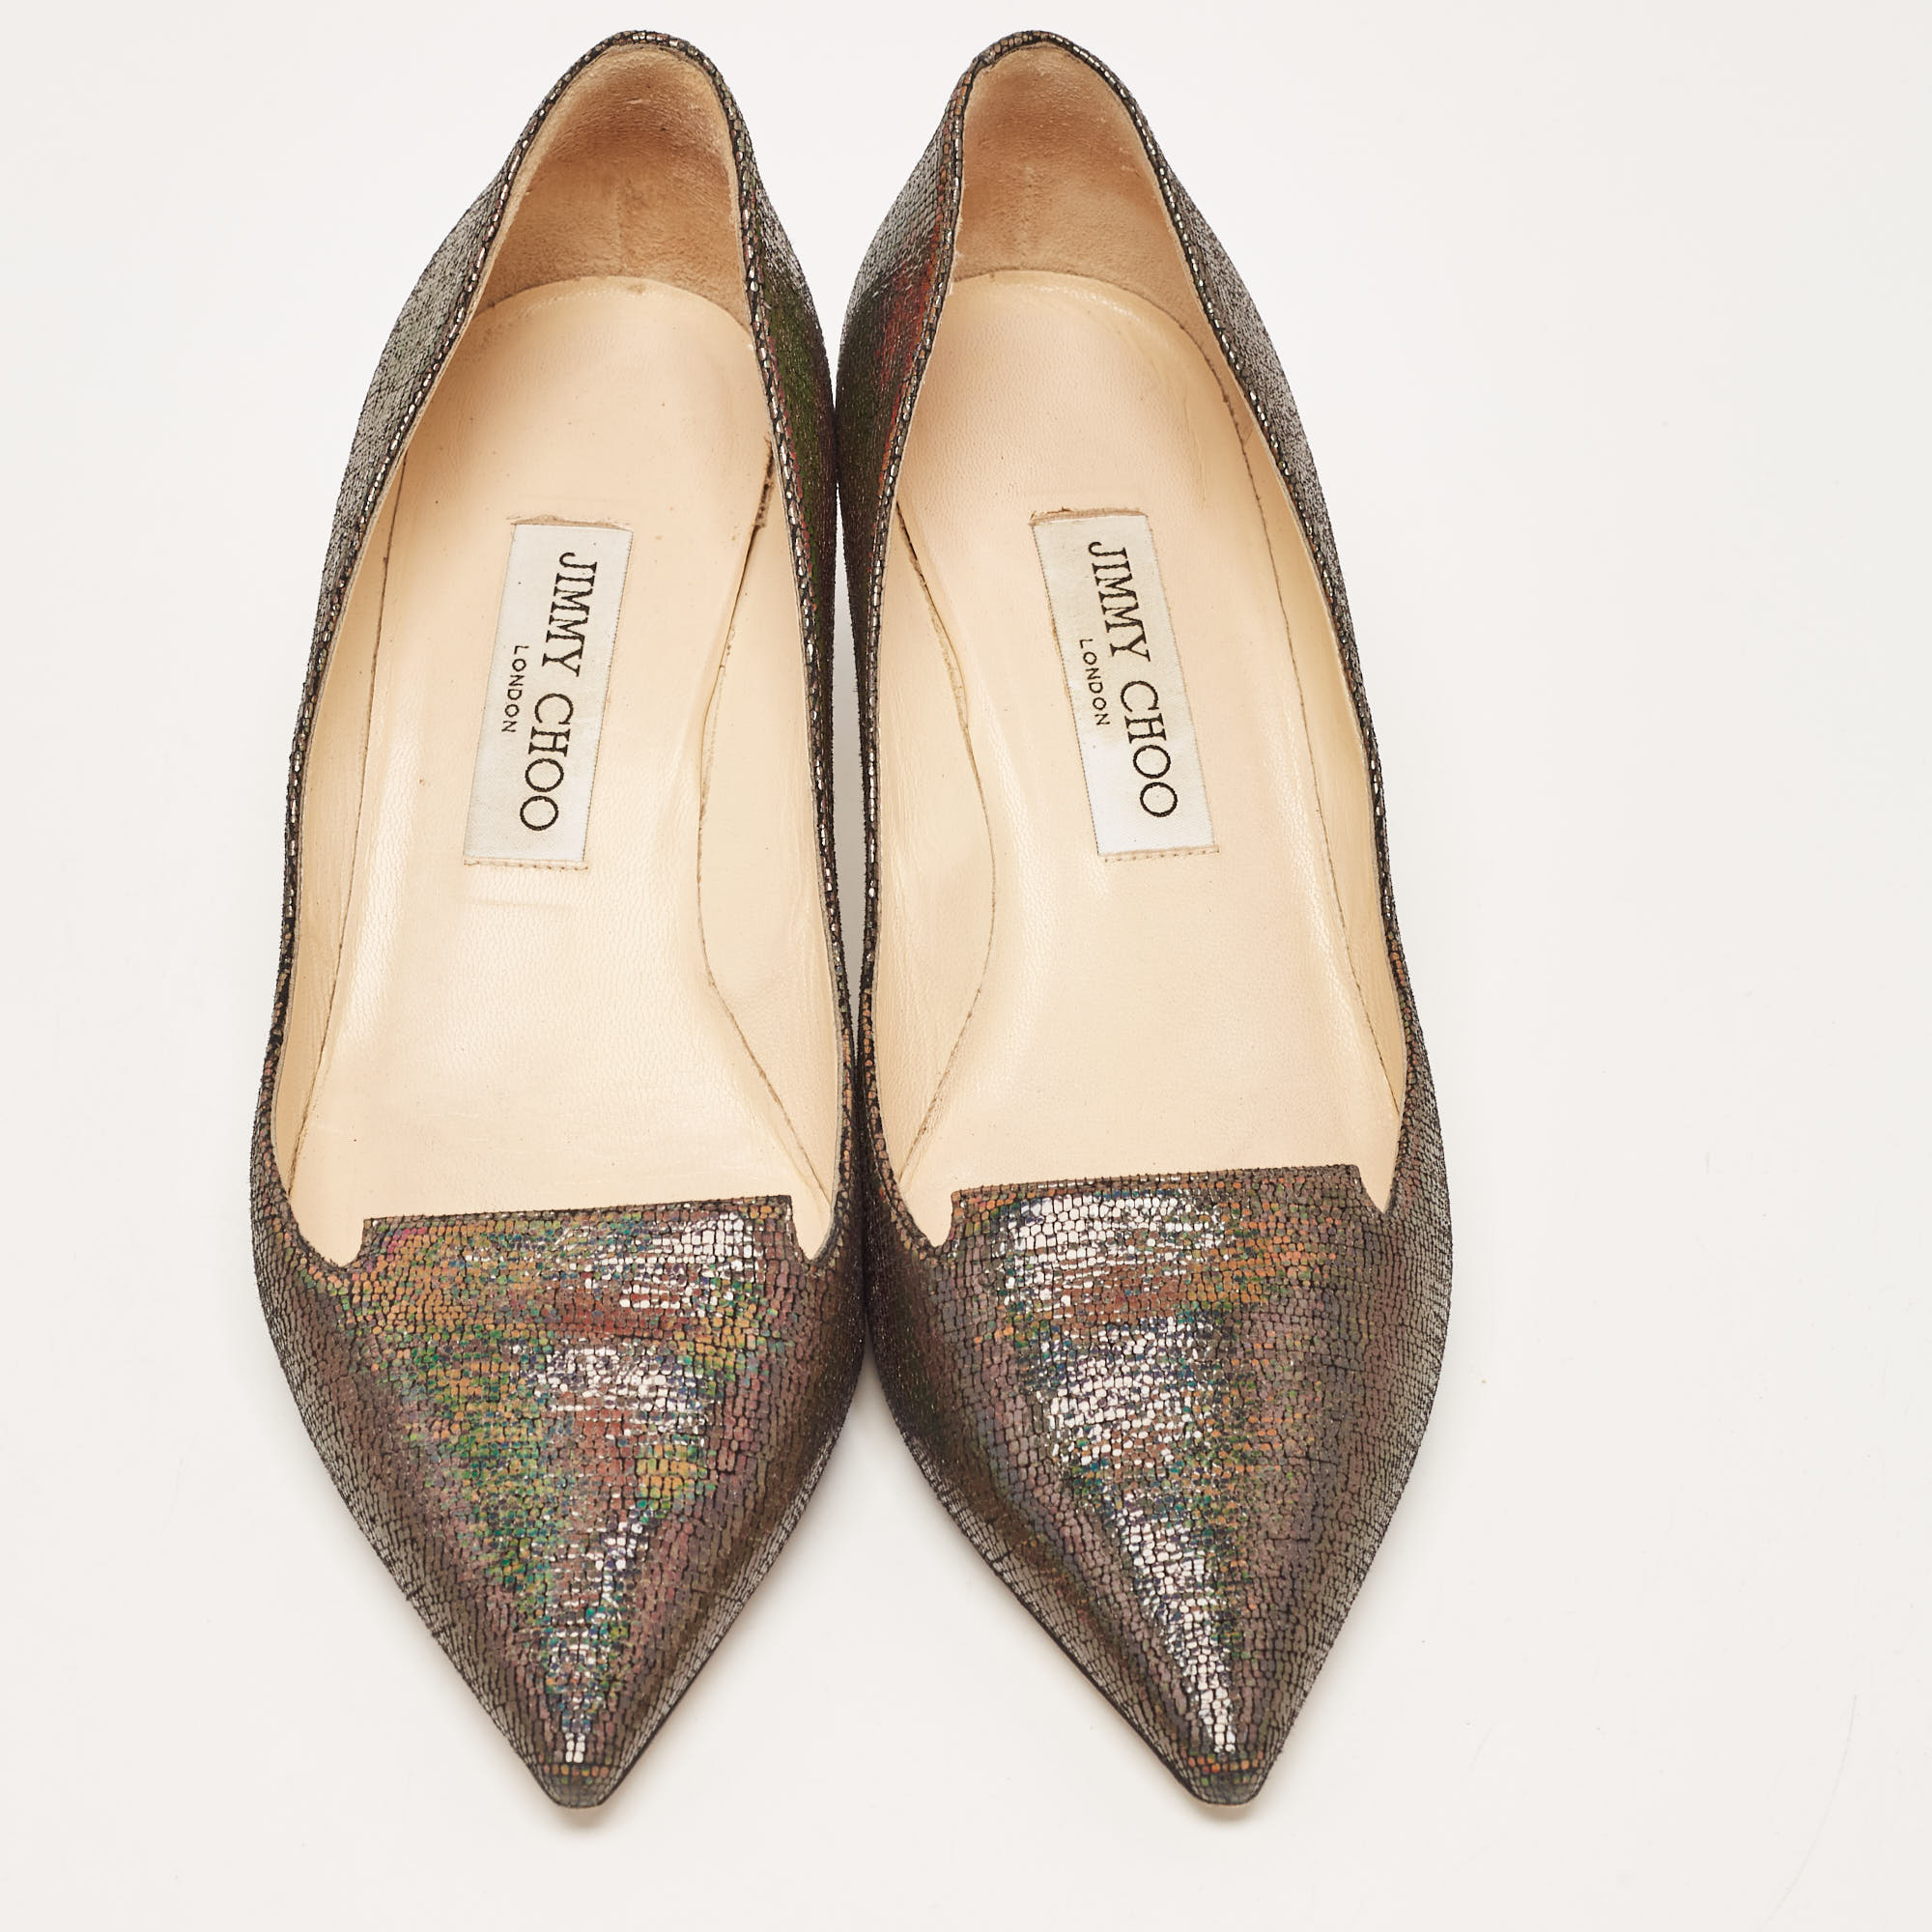 Jimmy Choo Metallic Laminated Suede Allure Pumps Size 38